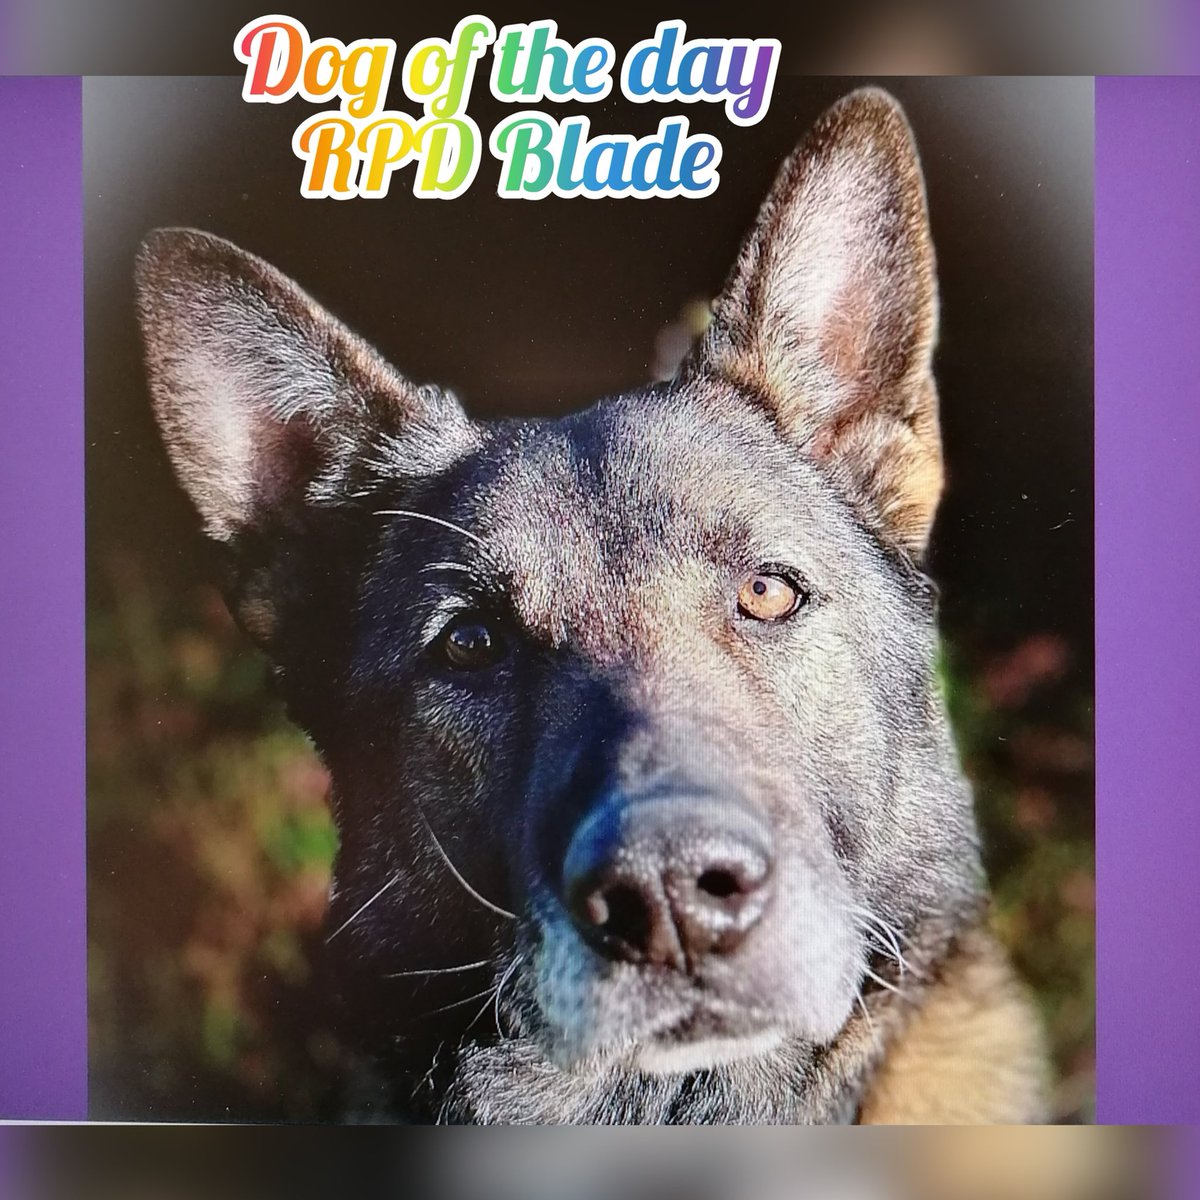 Our dog of the day is RPD Blade.

It’s with a heavy heart that we share with you that Blade has sadly crossed the rainbow bridge🌈. Our thoughts are with his family 😢

Thank you for your service🐾💙🐾
#WeWillRememberYou 

@K999CopsOAPs